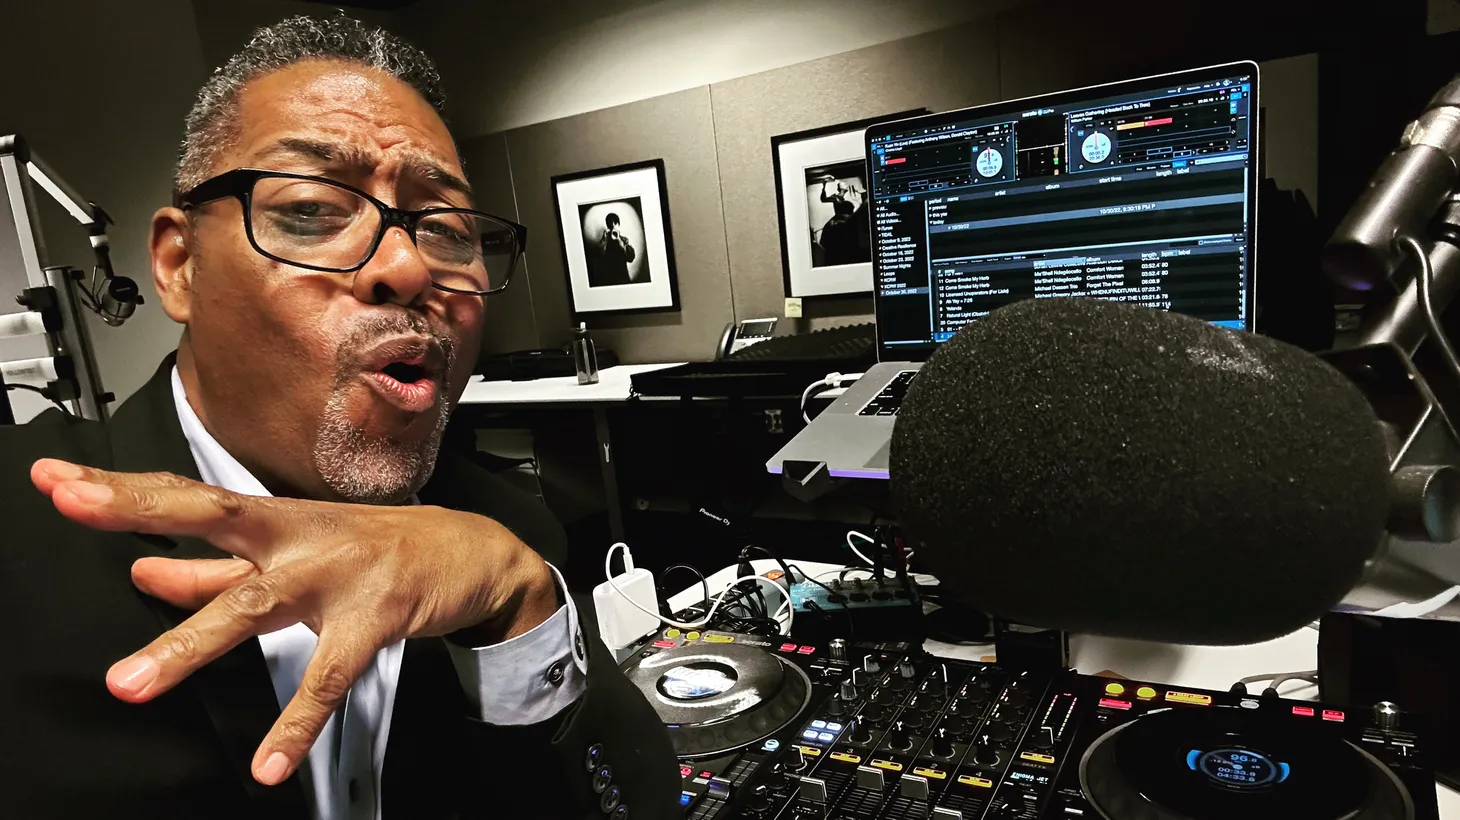 LeRoy Downs has been active in the jazz industry for the past twenty years, producing jazz radio programs, hosting festivals, and curating concerts.